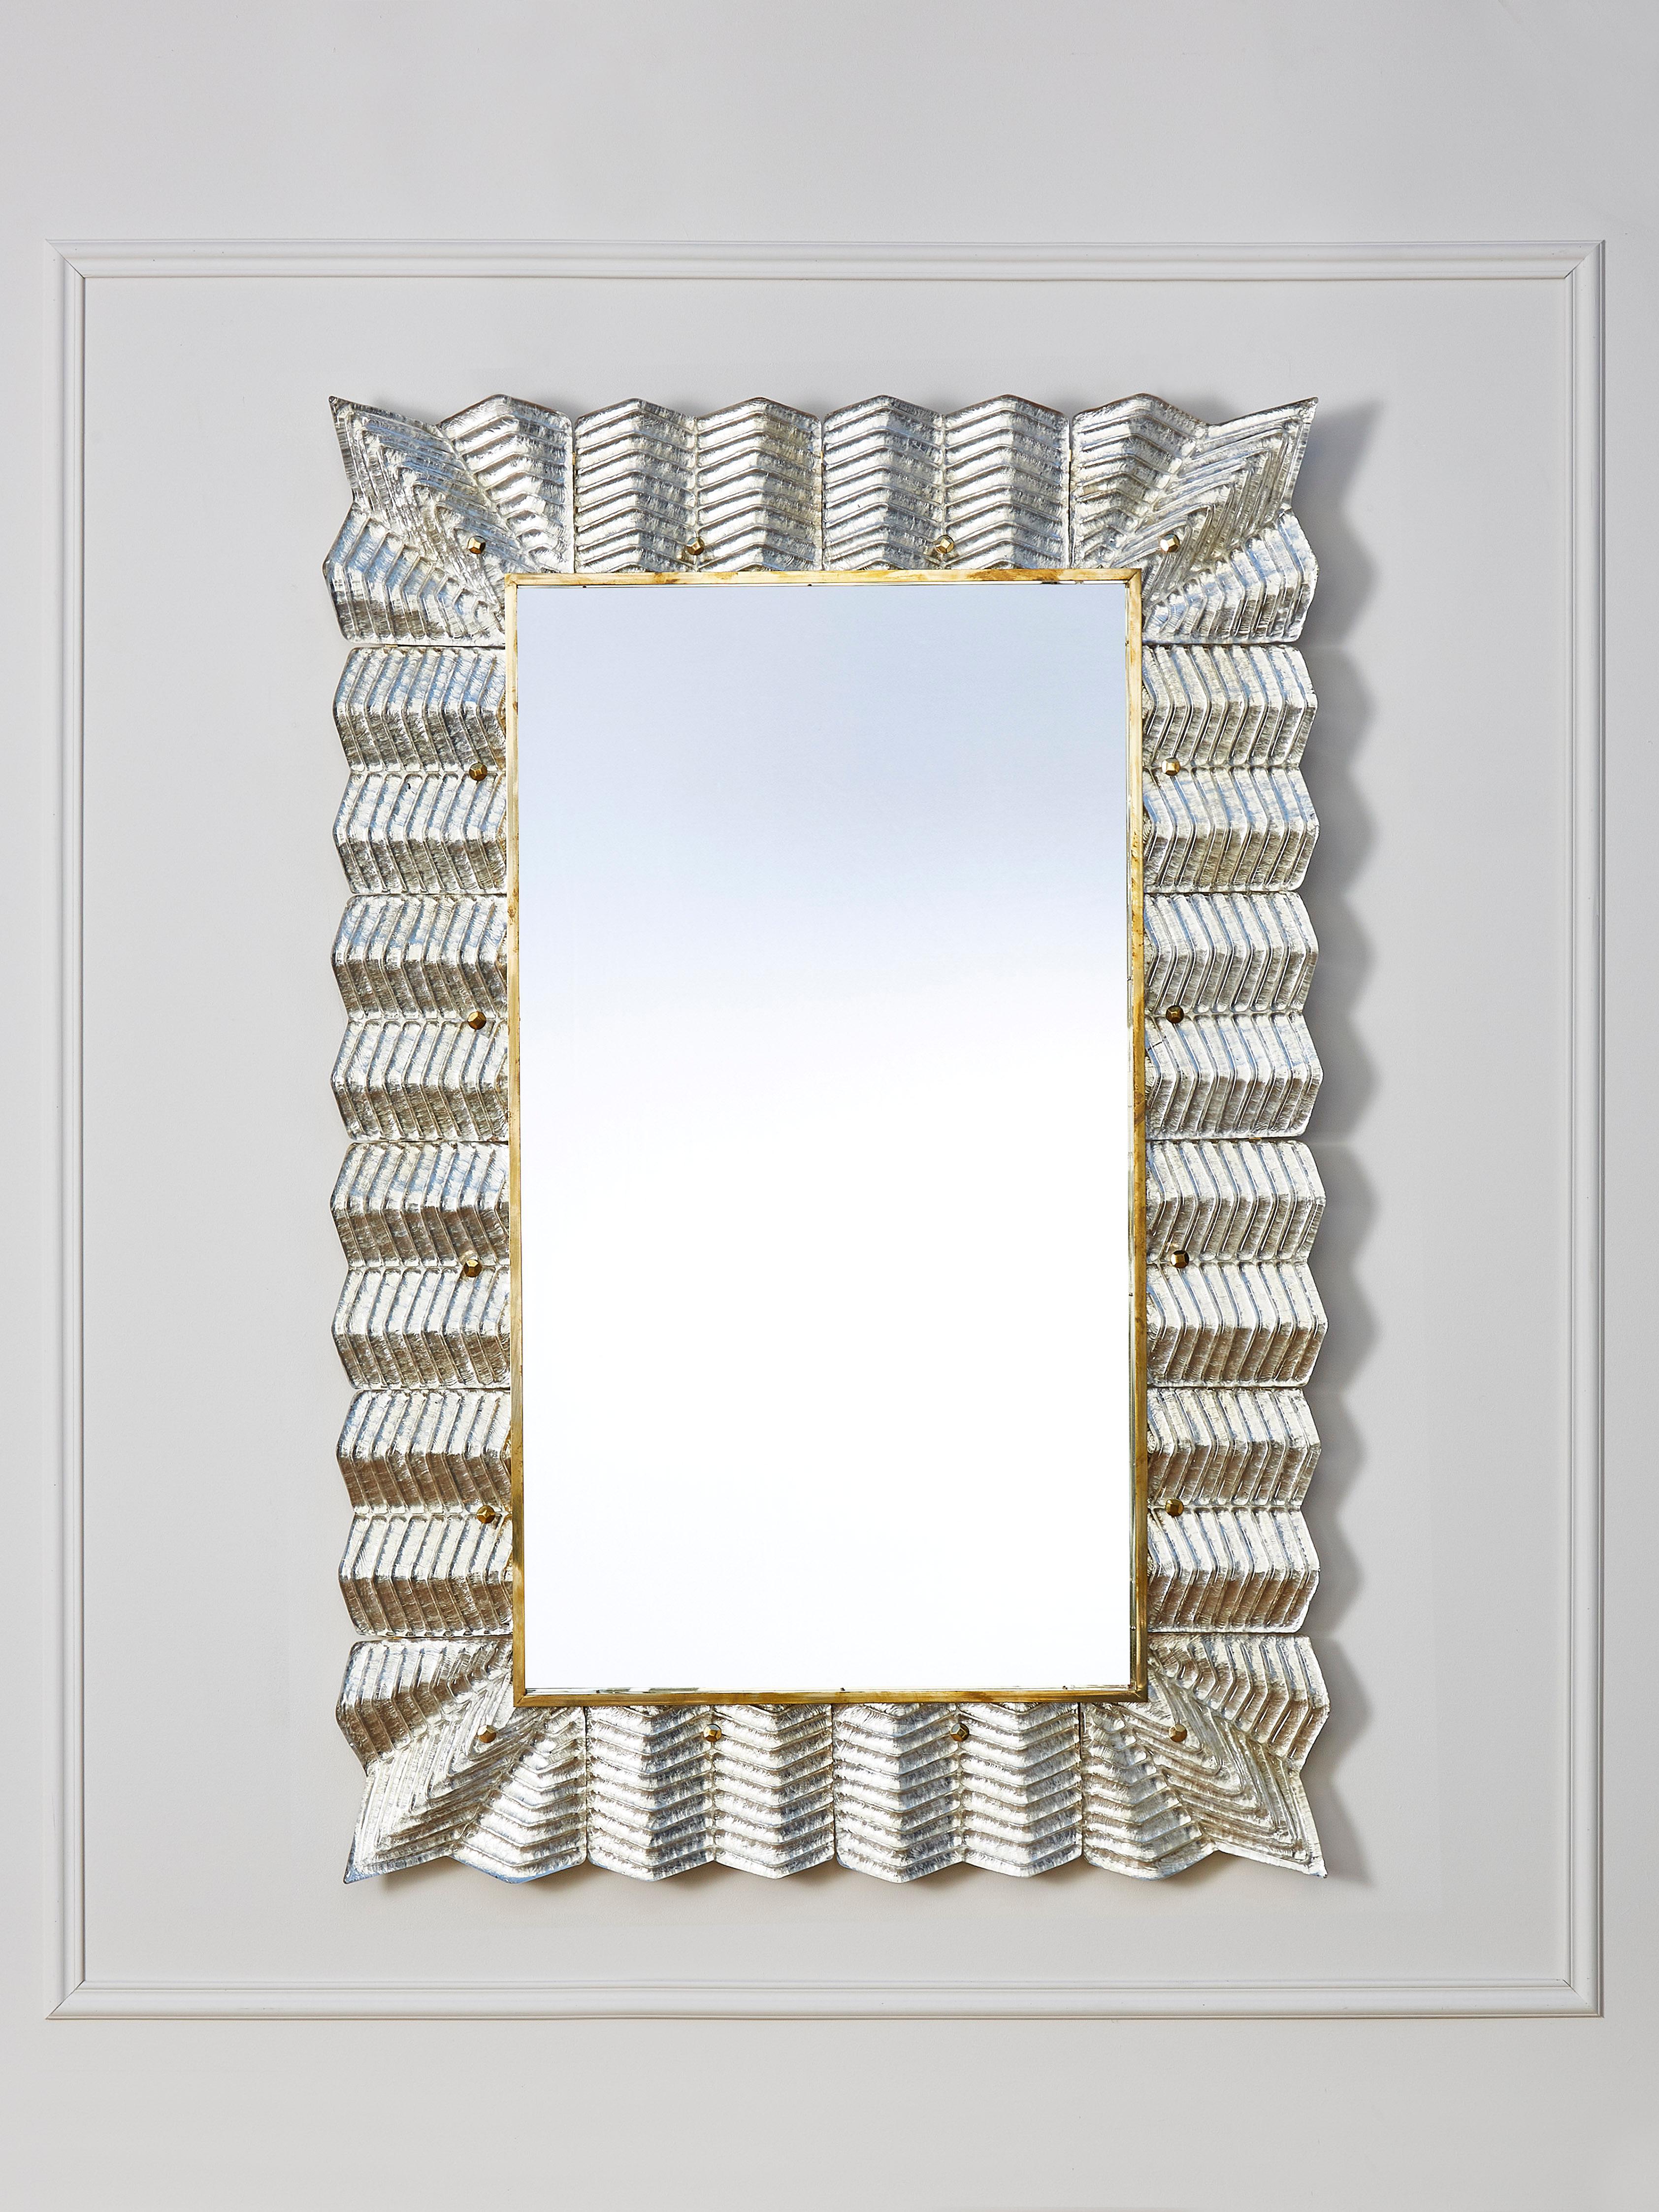 Elegant mirror with a frame made of brass and sculpted Murano glass, gilt with silver leaf.
Creation by Studio Glustin.